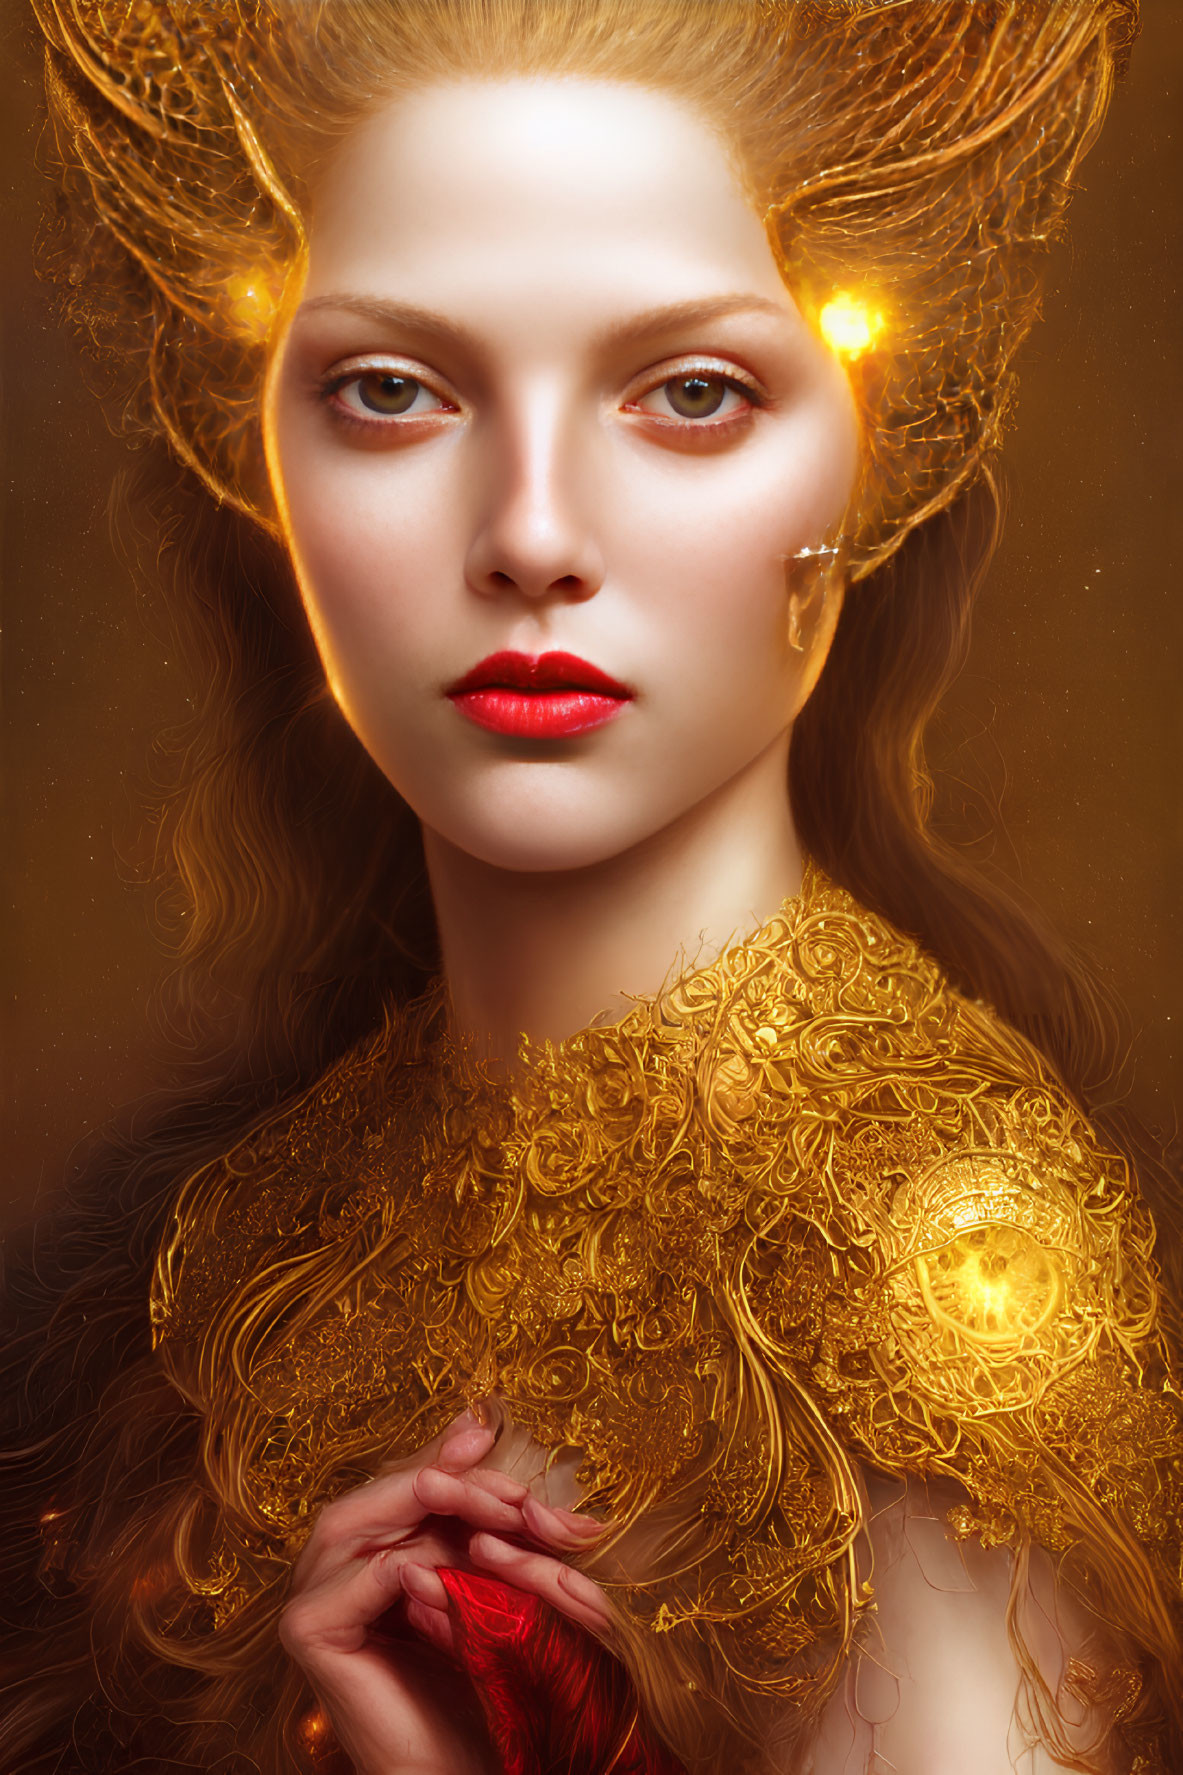 Intricate golden headpiece and garment on woman with captivating gaze